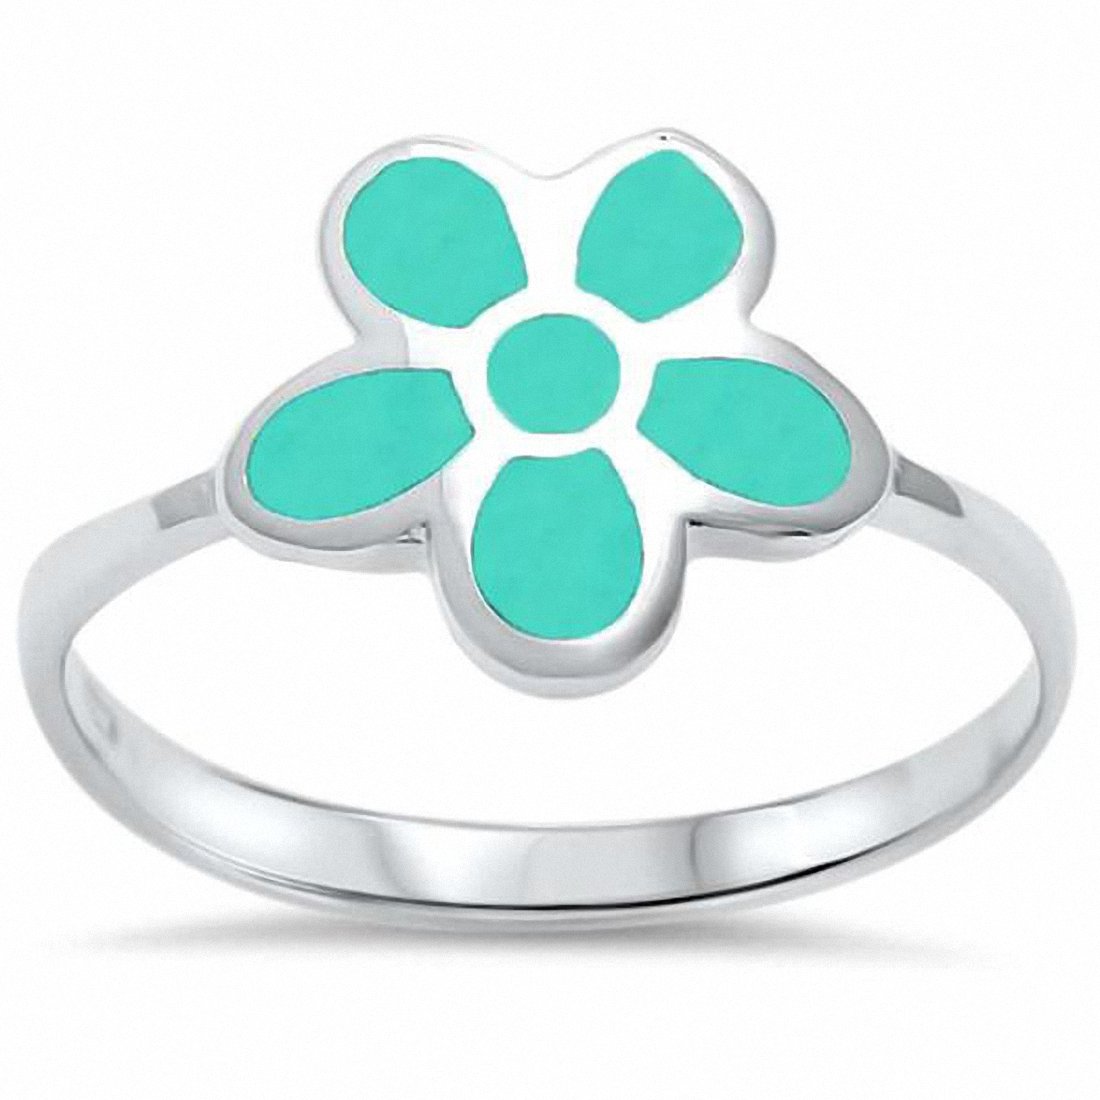 Flower Ring Simulated 925 Sterling Silver